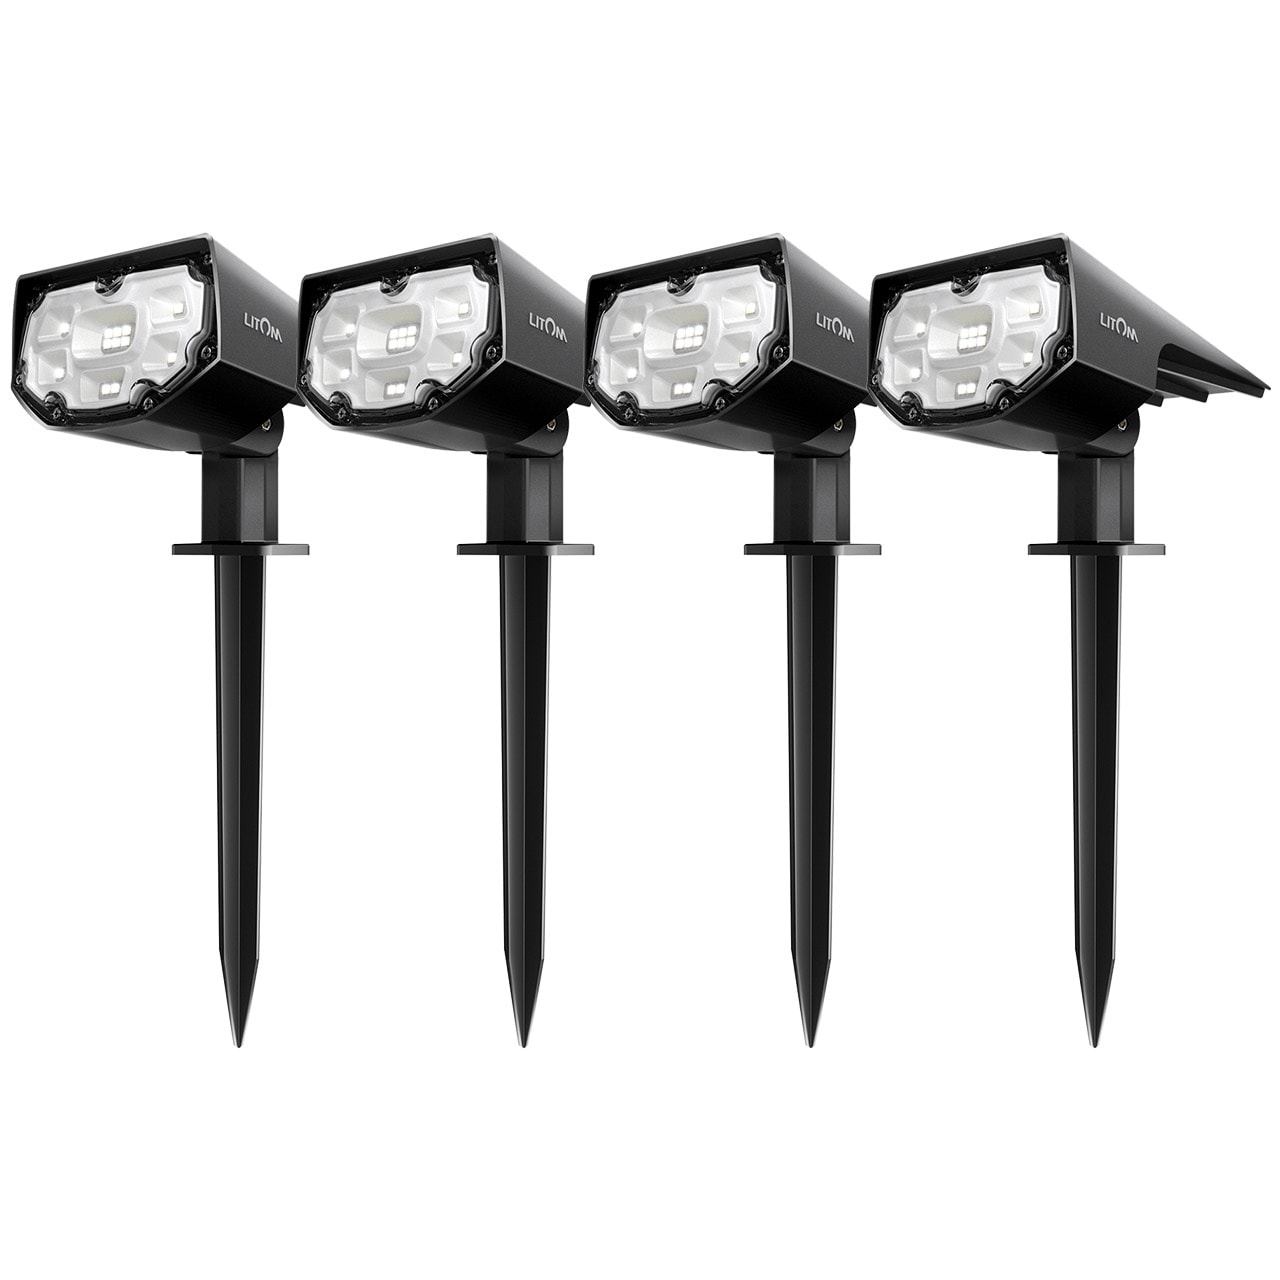 Bright White 2-in-1 Wireless Security Wall Light for Yard Garden Path Driveway Porch Walkway Pool Patio 6-Pack IP67 Waterproof JESLED 14 LED Landscape Spotlights Outdoor Solar Powered Spot Lights